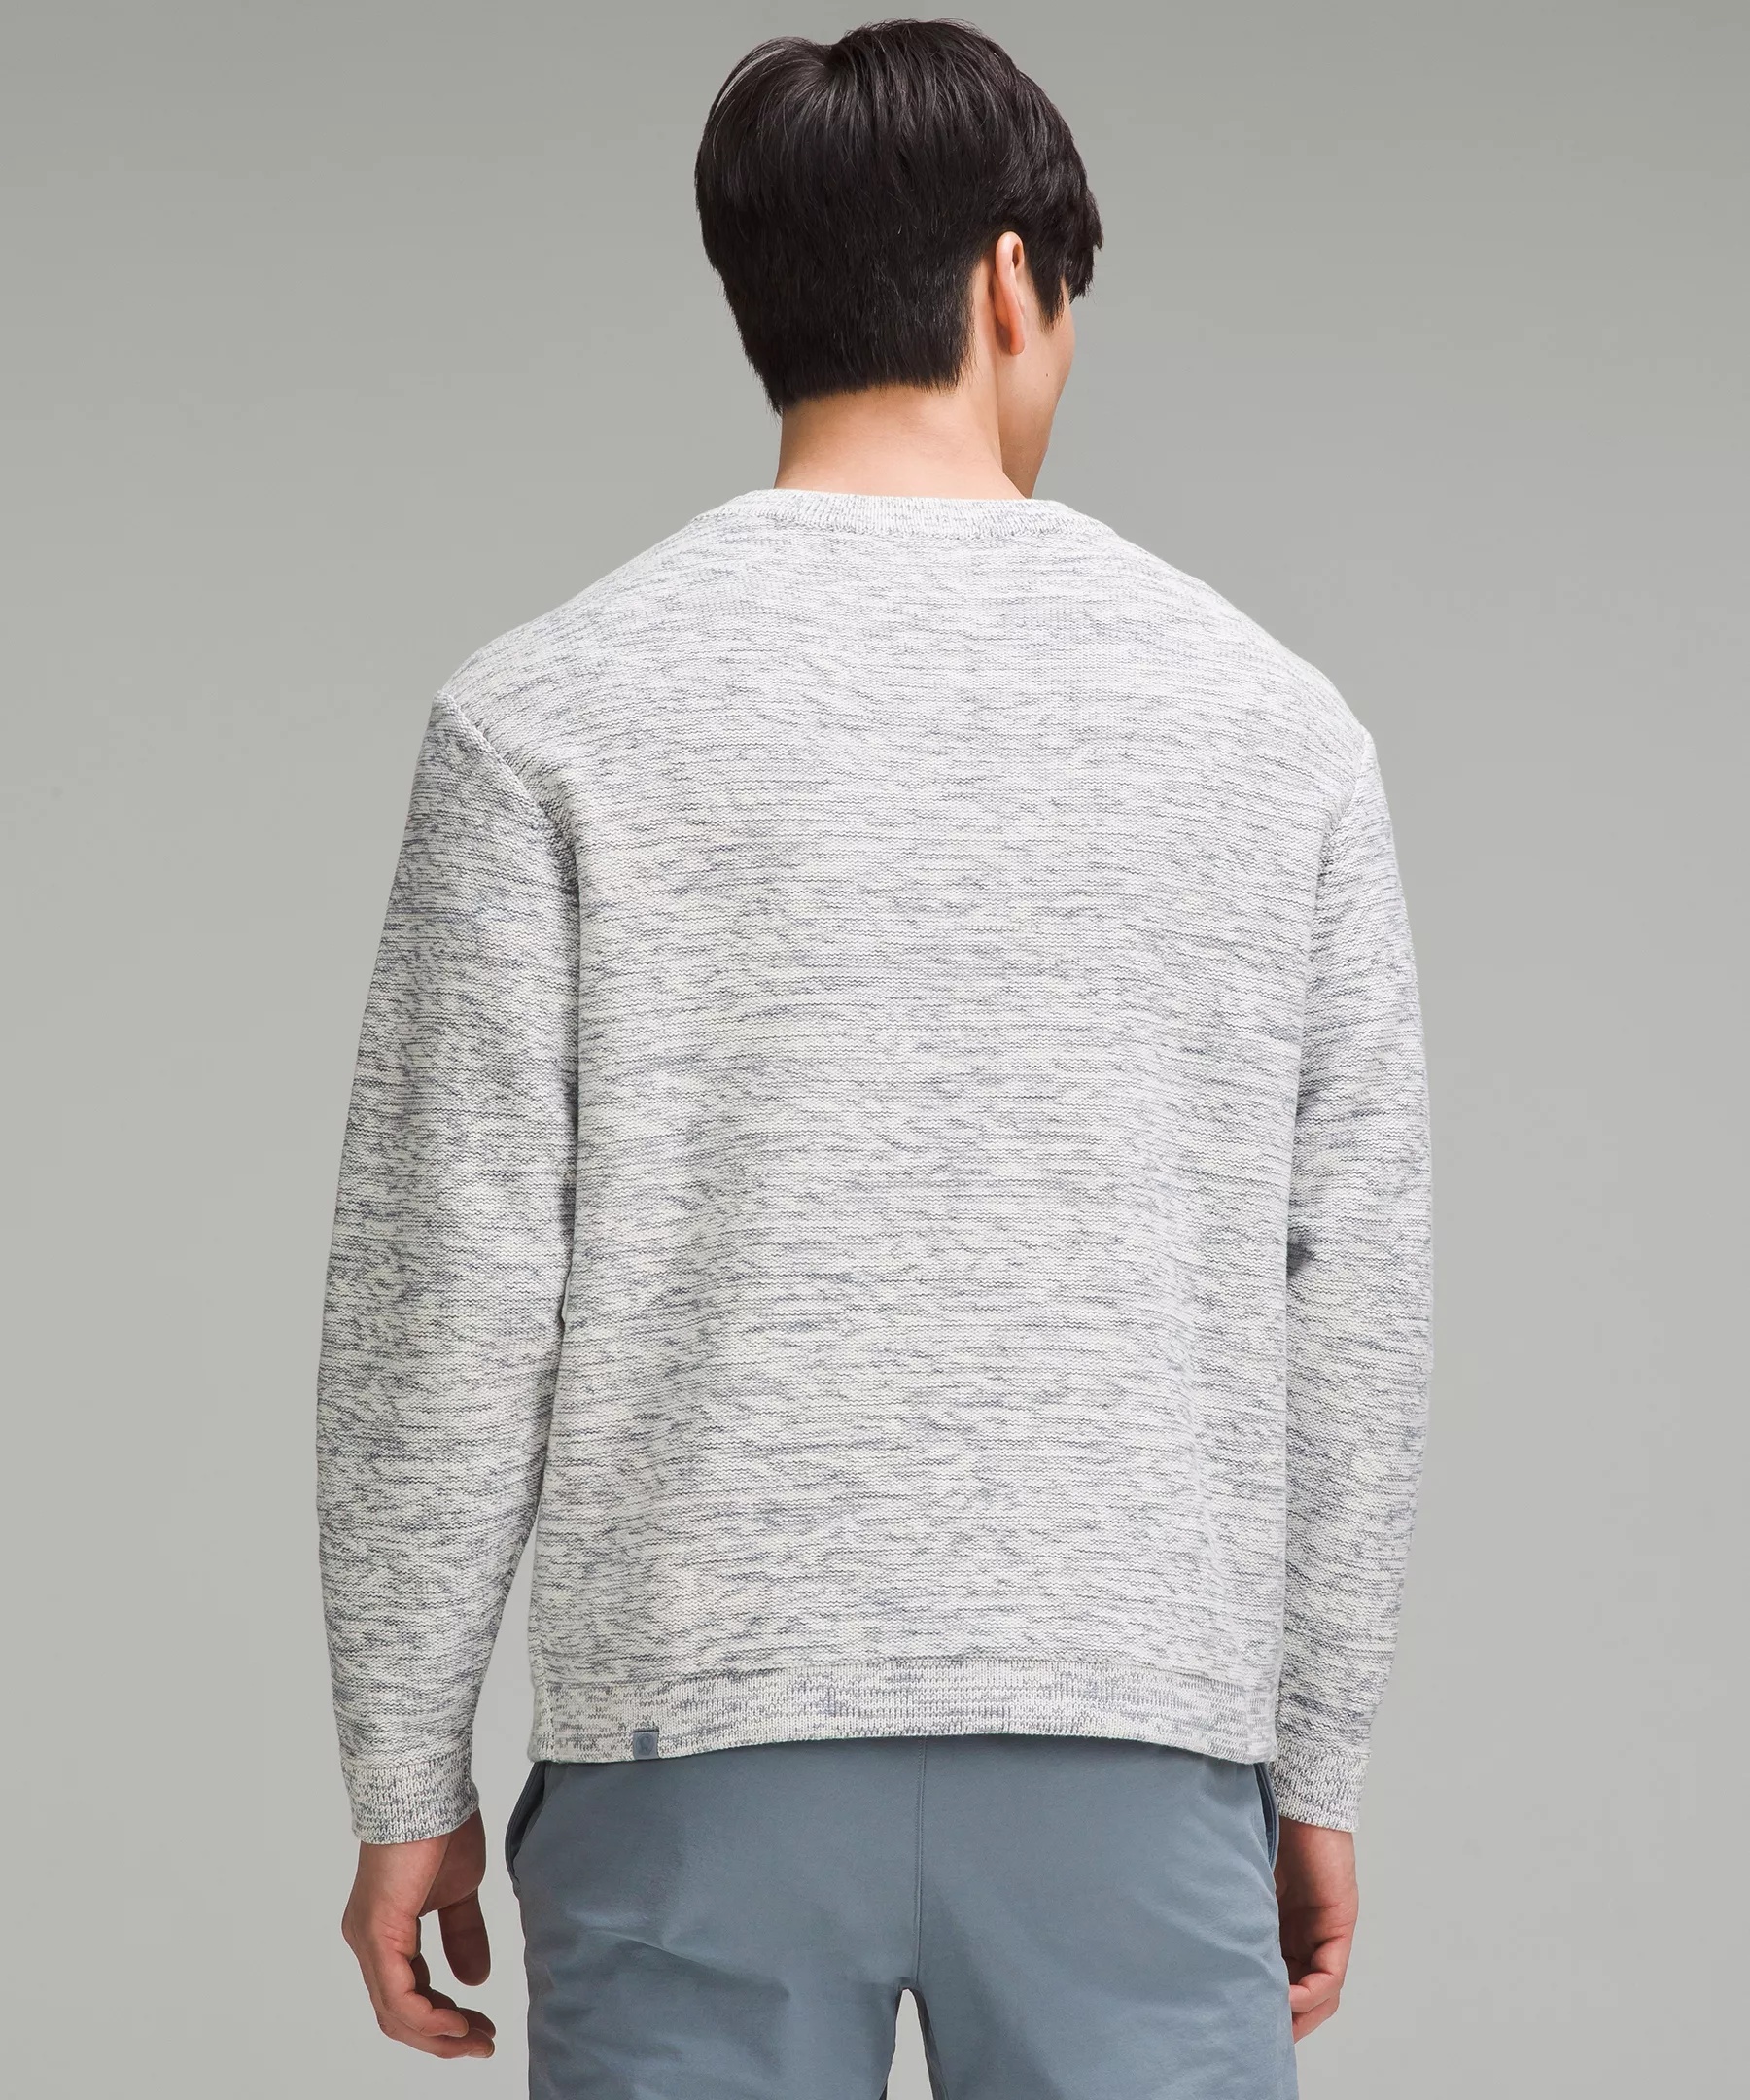 Relaxed-Fit Crewneck Knit Sweater - 3